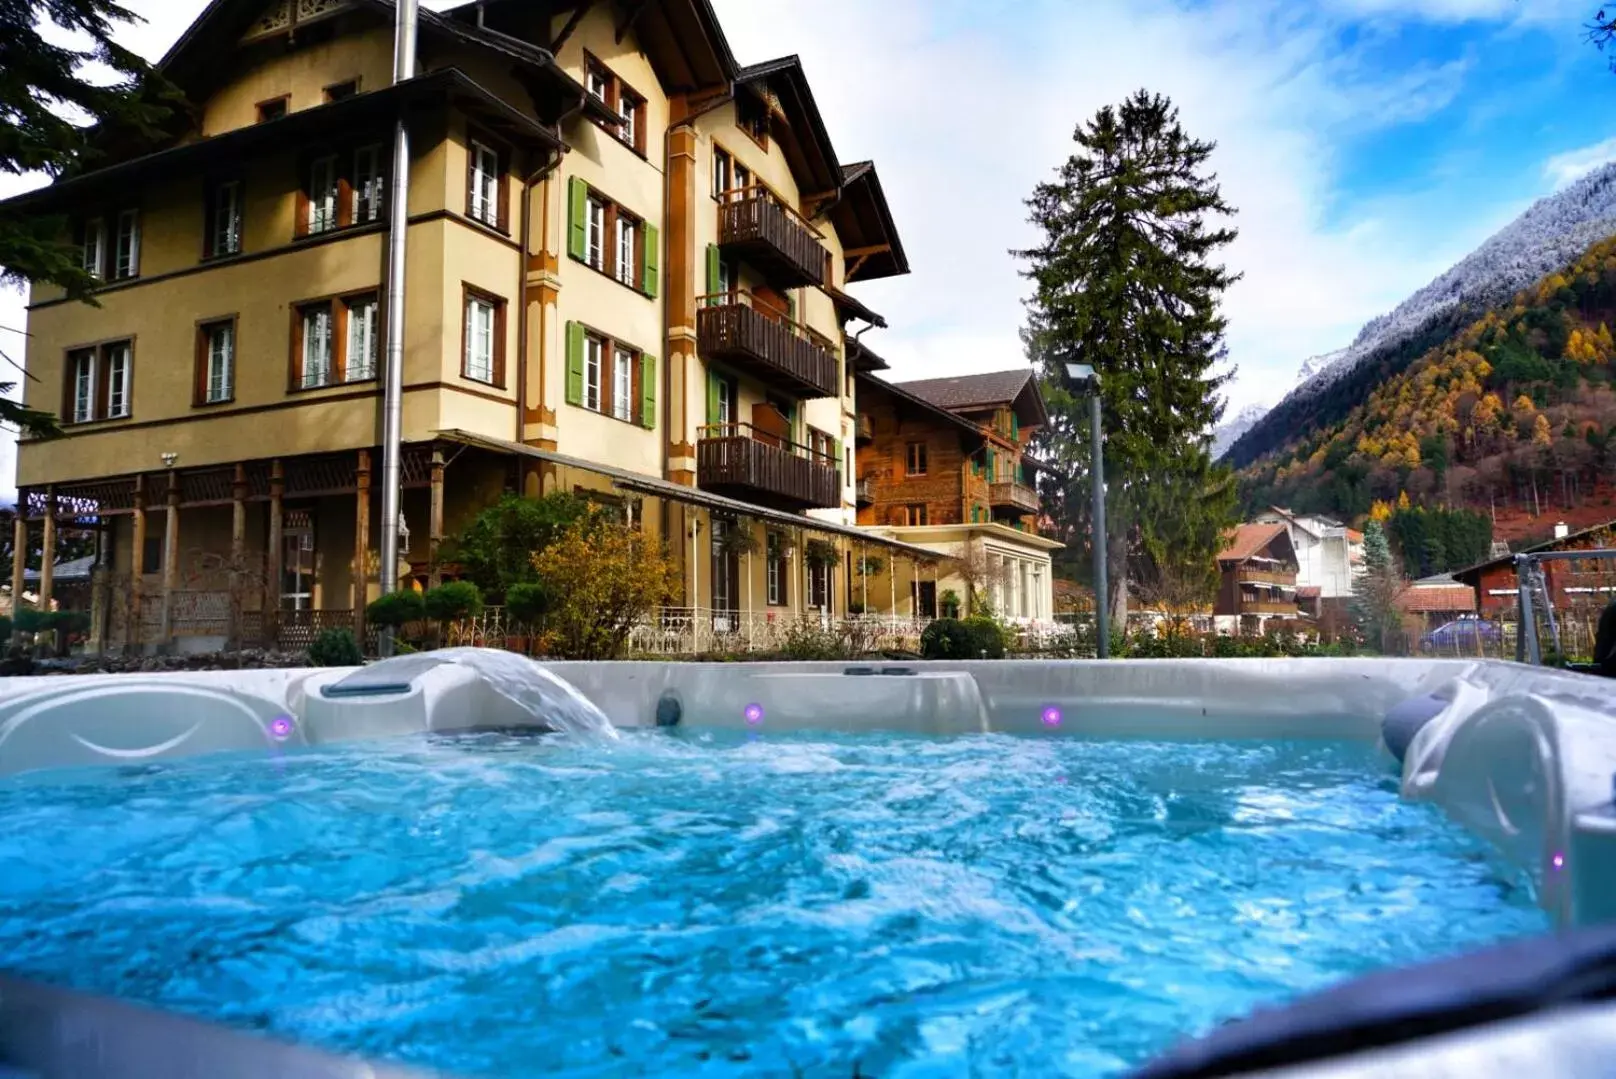 Hot Tub, Property Building in Alpenrose Hotel and Gardens